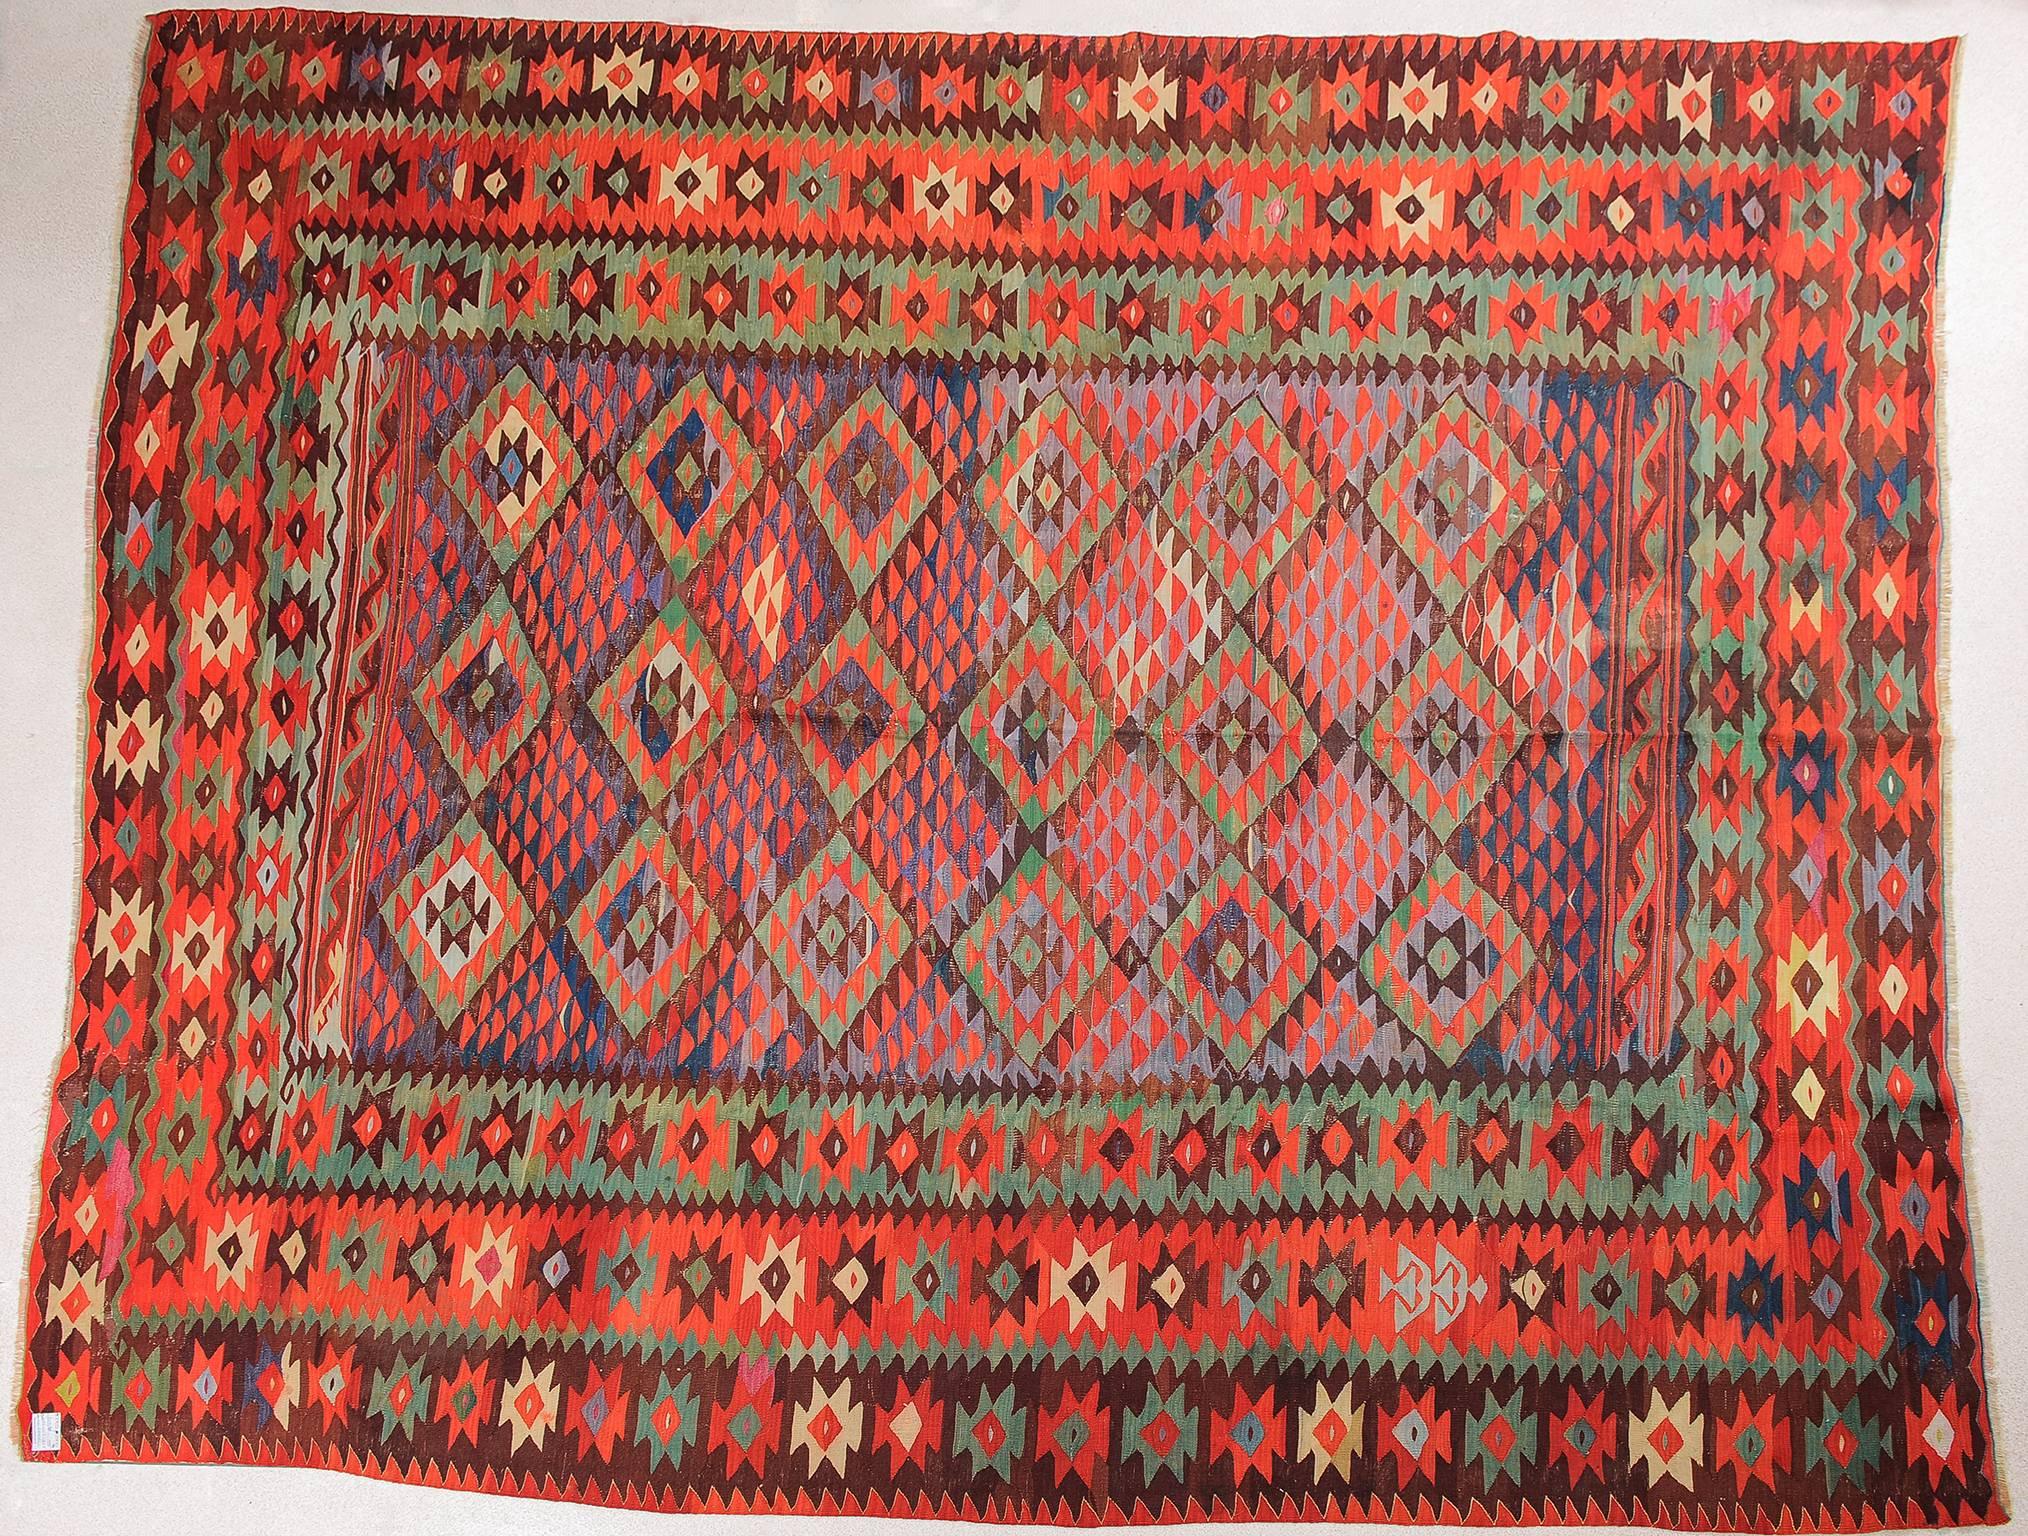 SHARKOY is the name given by Turks to the town of PIROT, in the border region between Serbia and Bulgaria. Once part of the Ottoman Empire, this area has a long tradition of producing large kilim rugs, very finely woven, favored as summer carpets in